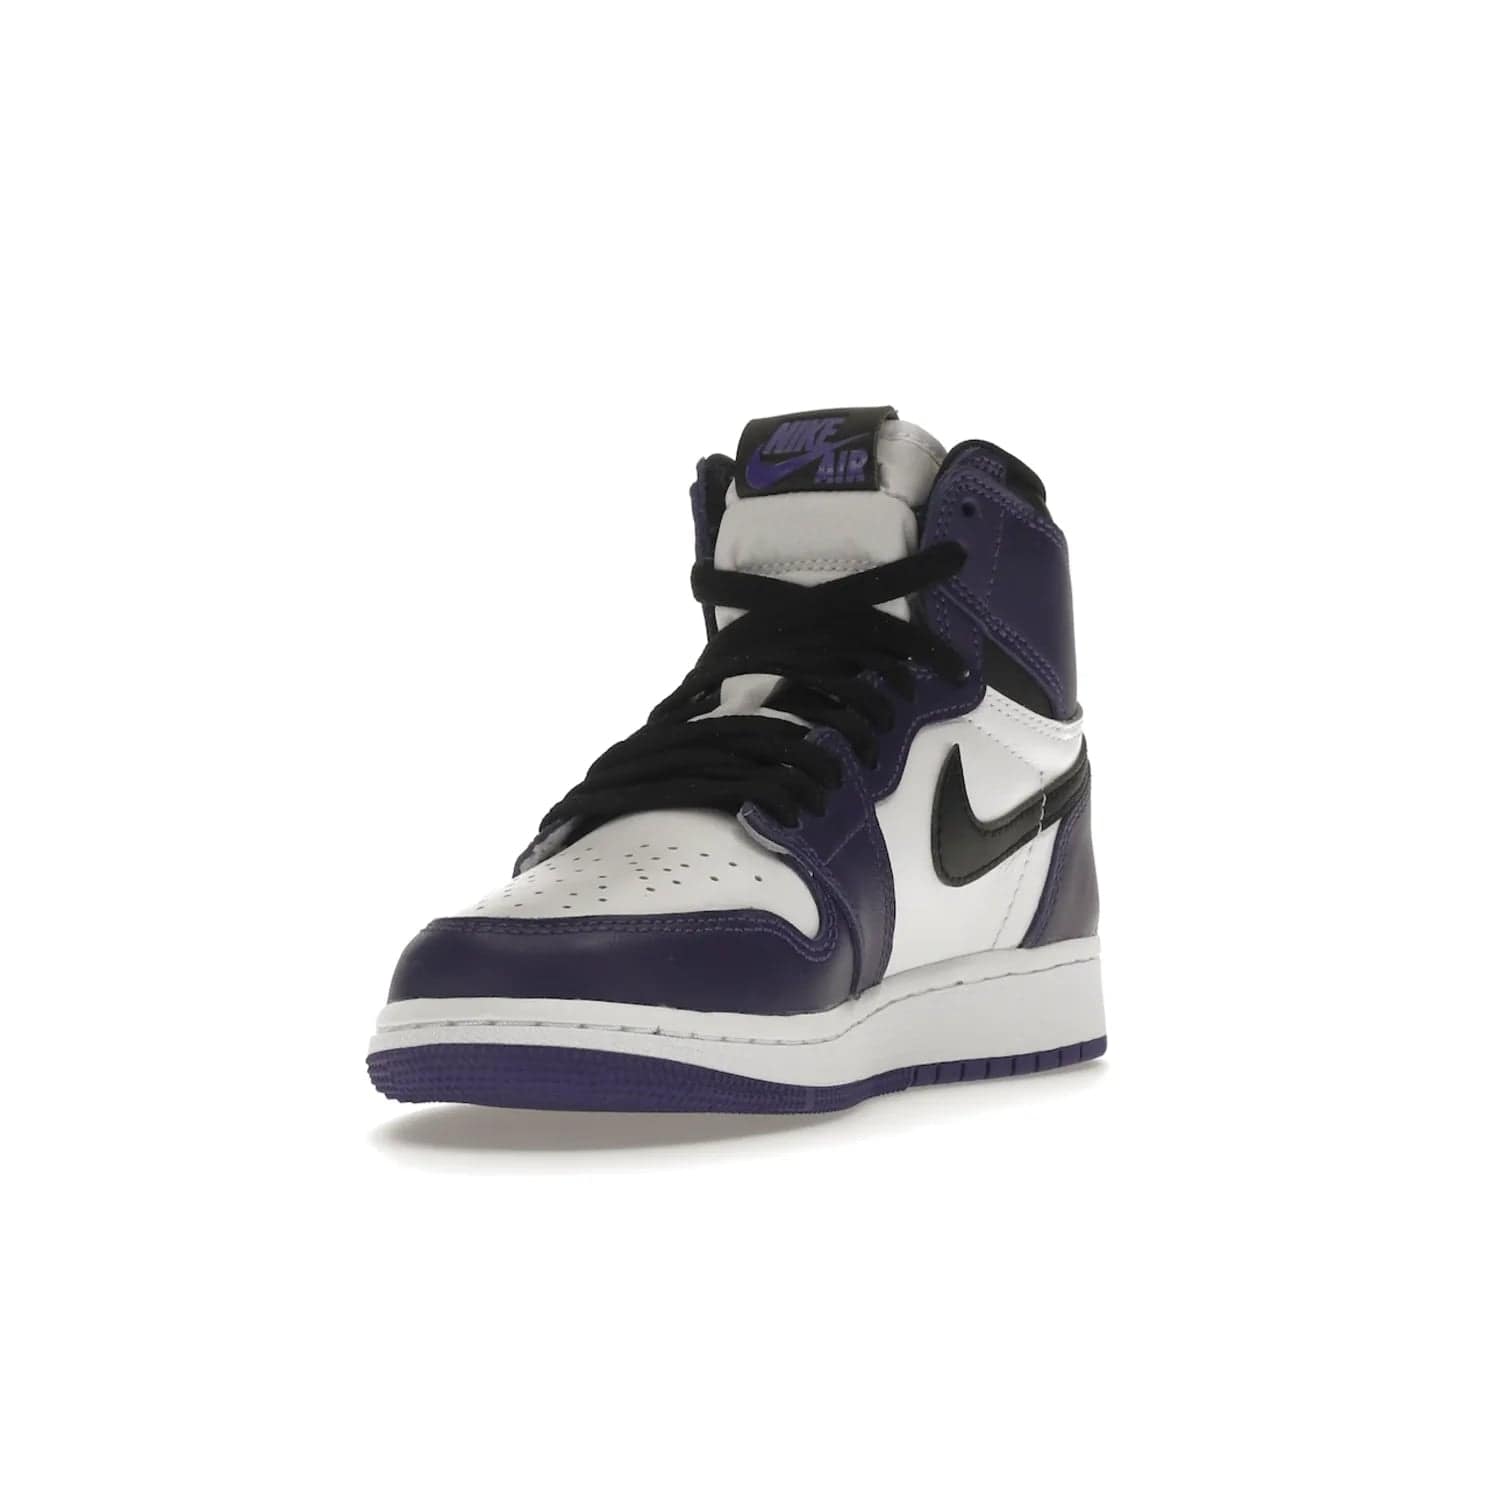 Jordan 1 Retro High Court Purple White (GS) - Image 13 - Only at www.BallersClubKickz.com - The Air Jordan 1 Retro High Court Purple is here and young sneaker heads can show off classic style. Features a white tumbled leather upper, black swoosh, purple overlays, black collar with purple overlay, white tongue, black patch with purple Nike Air logo and swoosh, white midsole, and purple rubber outsole with circular pattern.